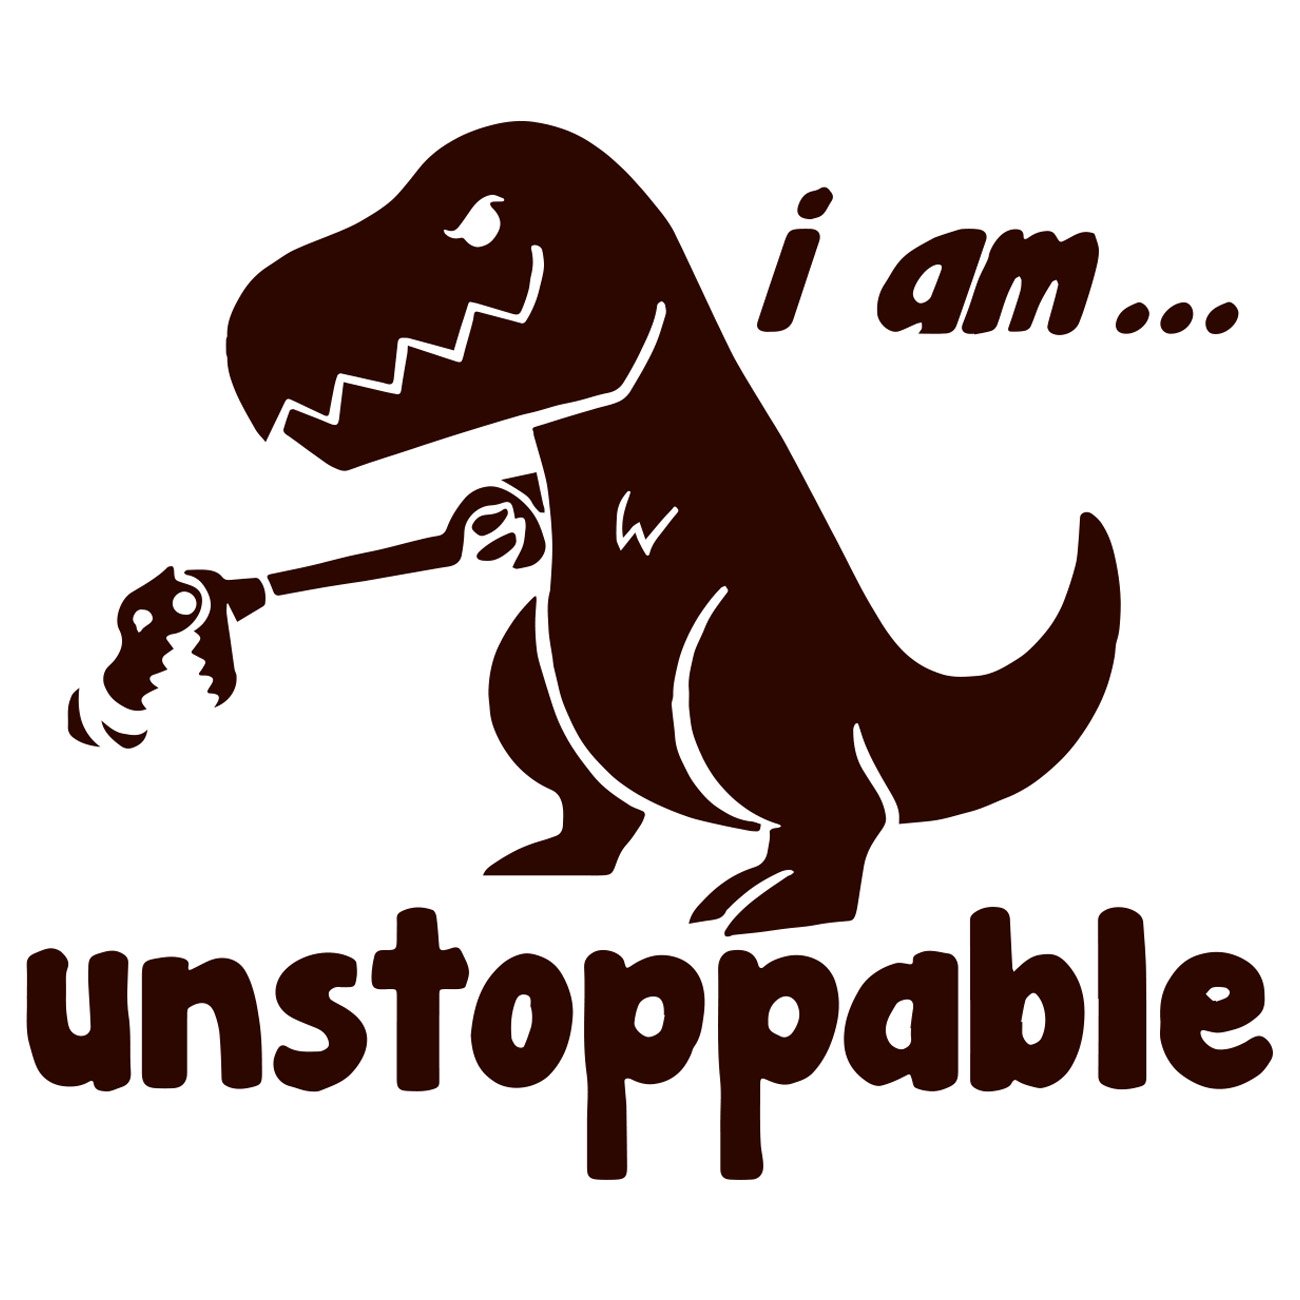 I am unstappable - Dino